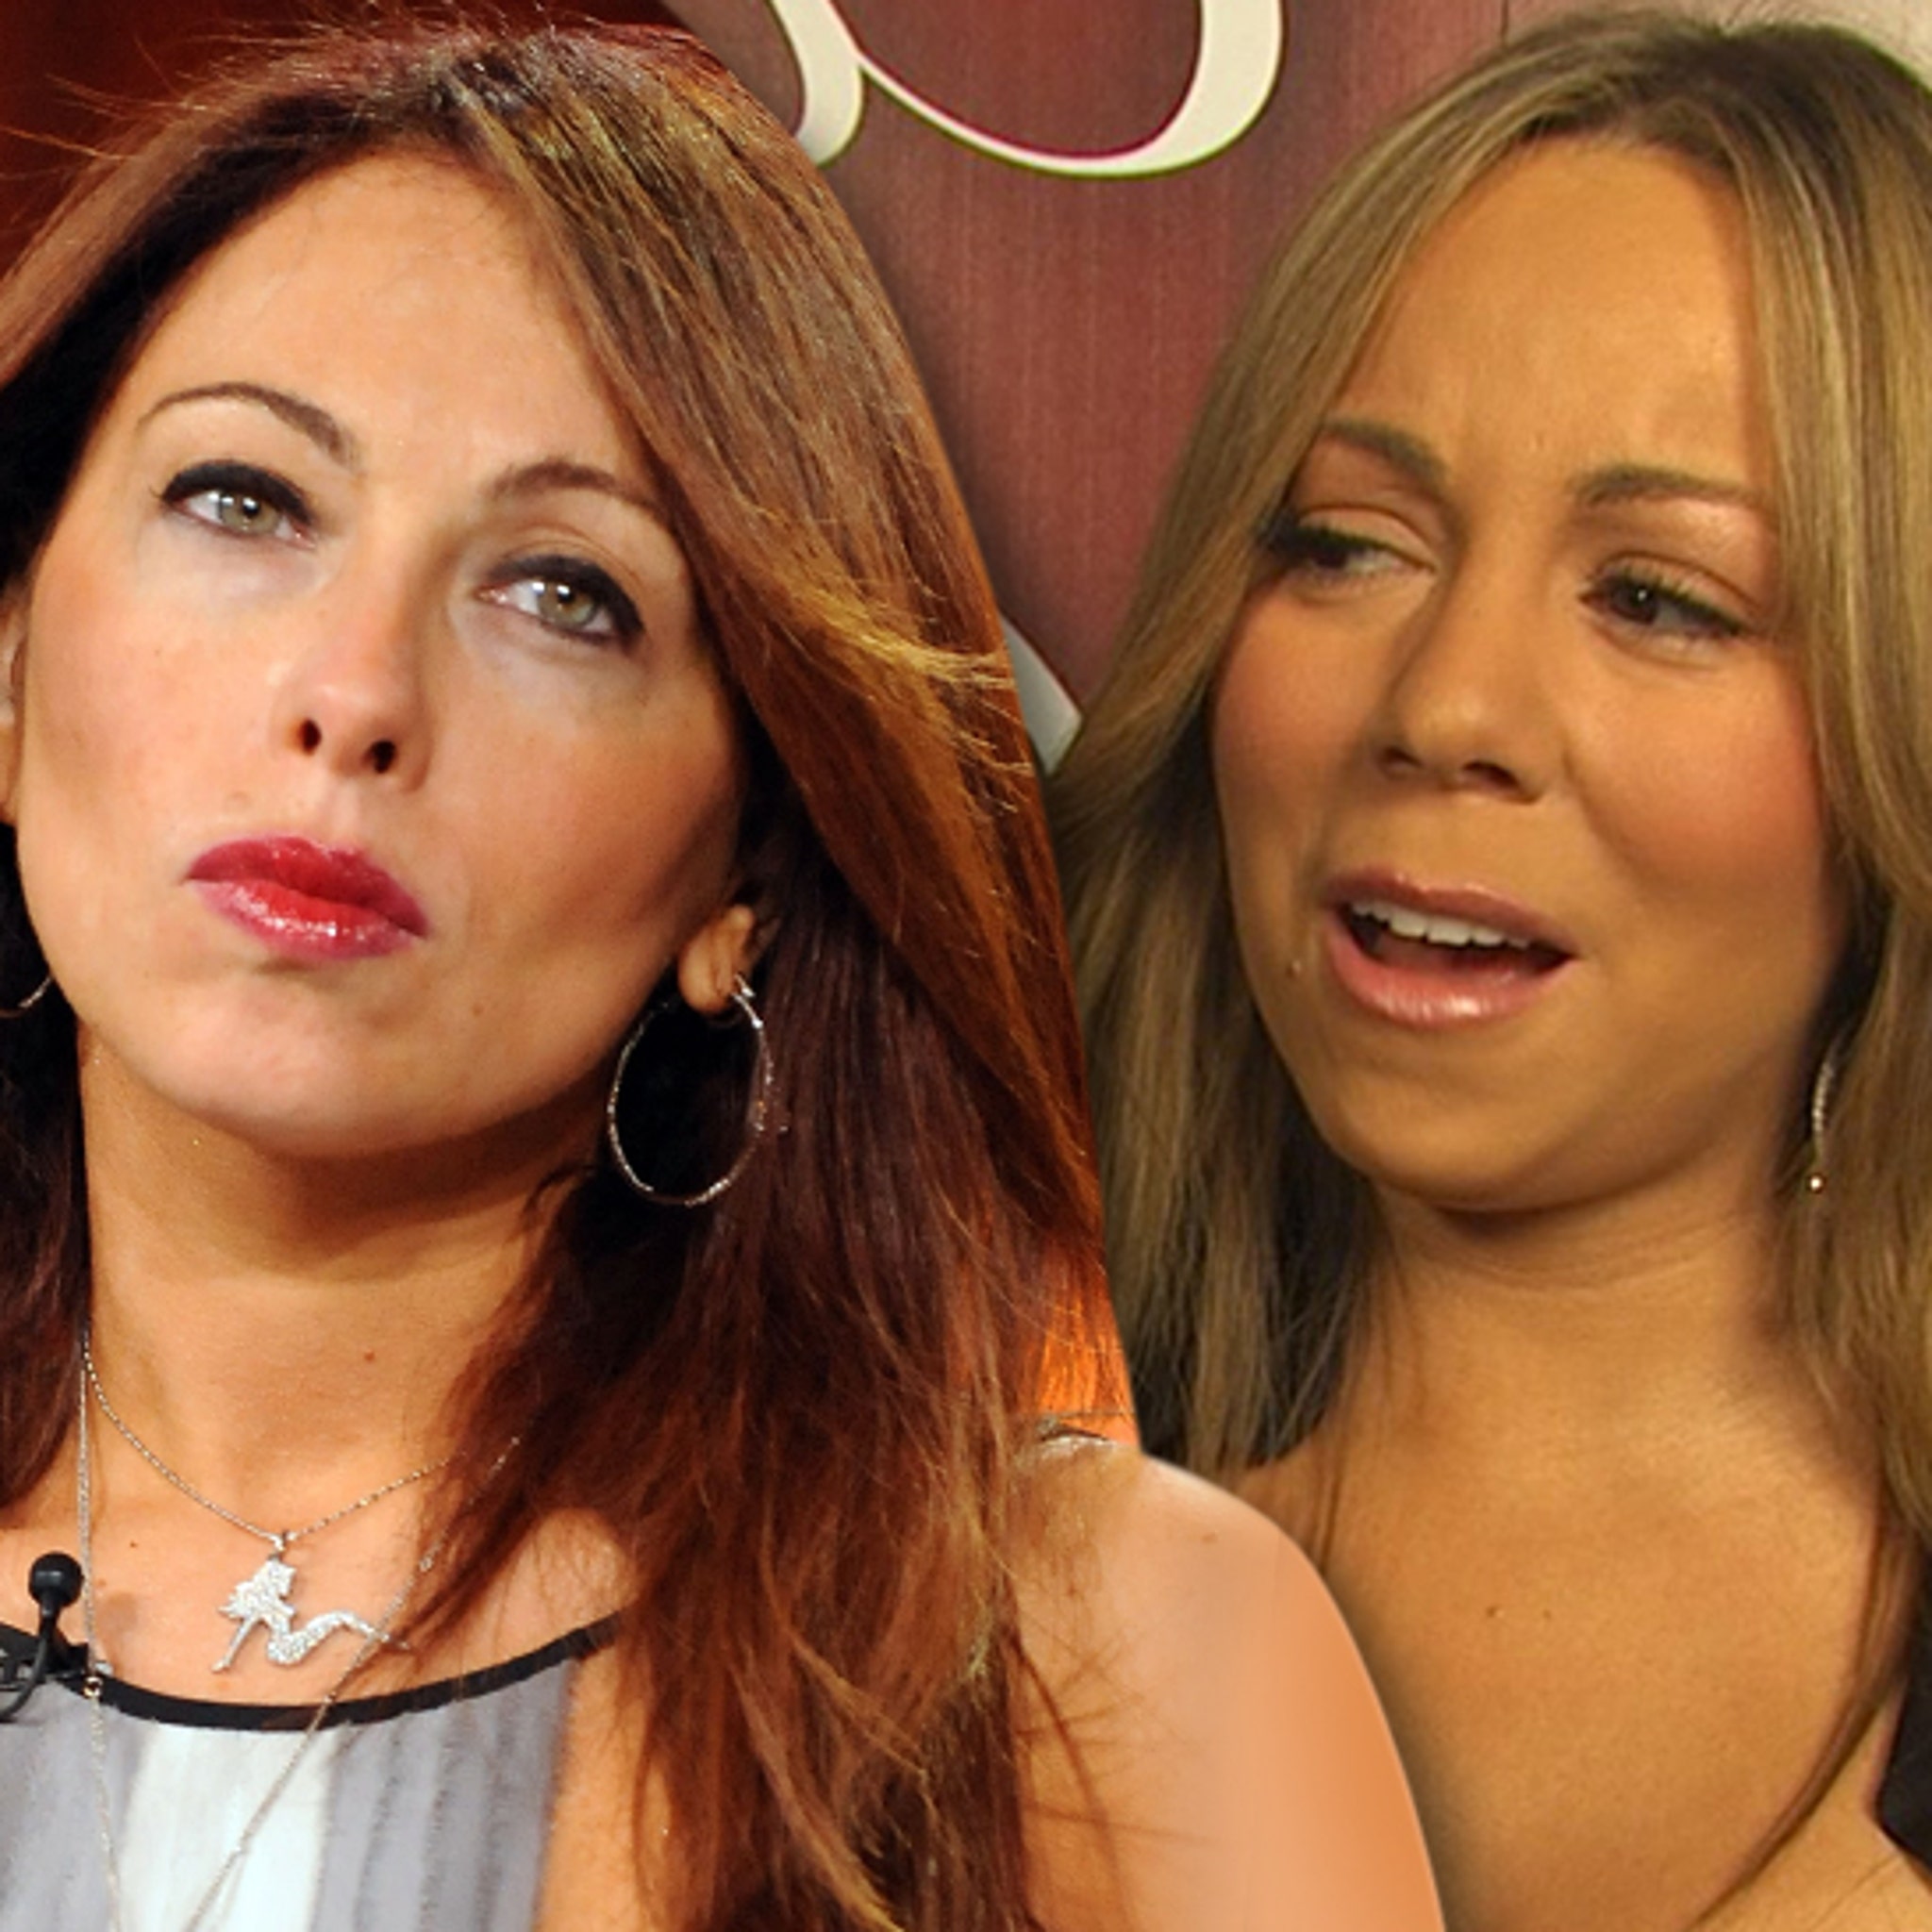 Mariah Carey's Former Manager is Claiming Sexual Harassment